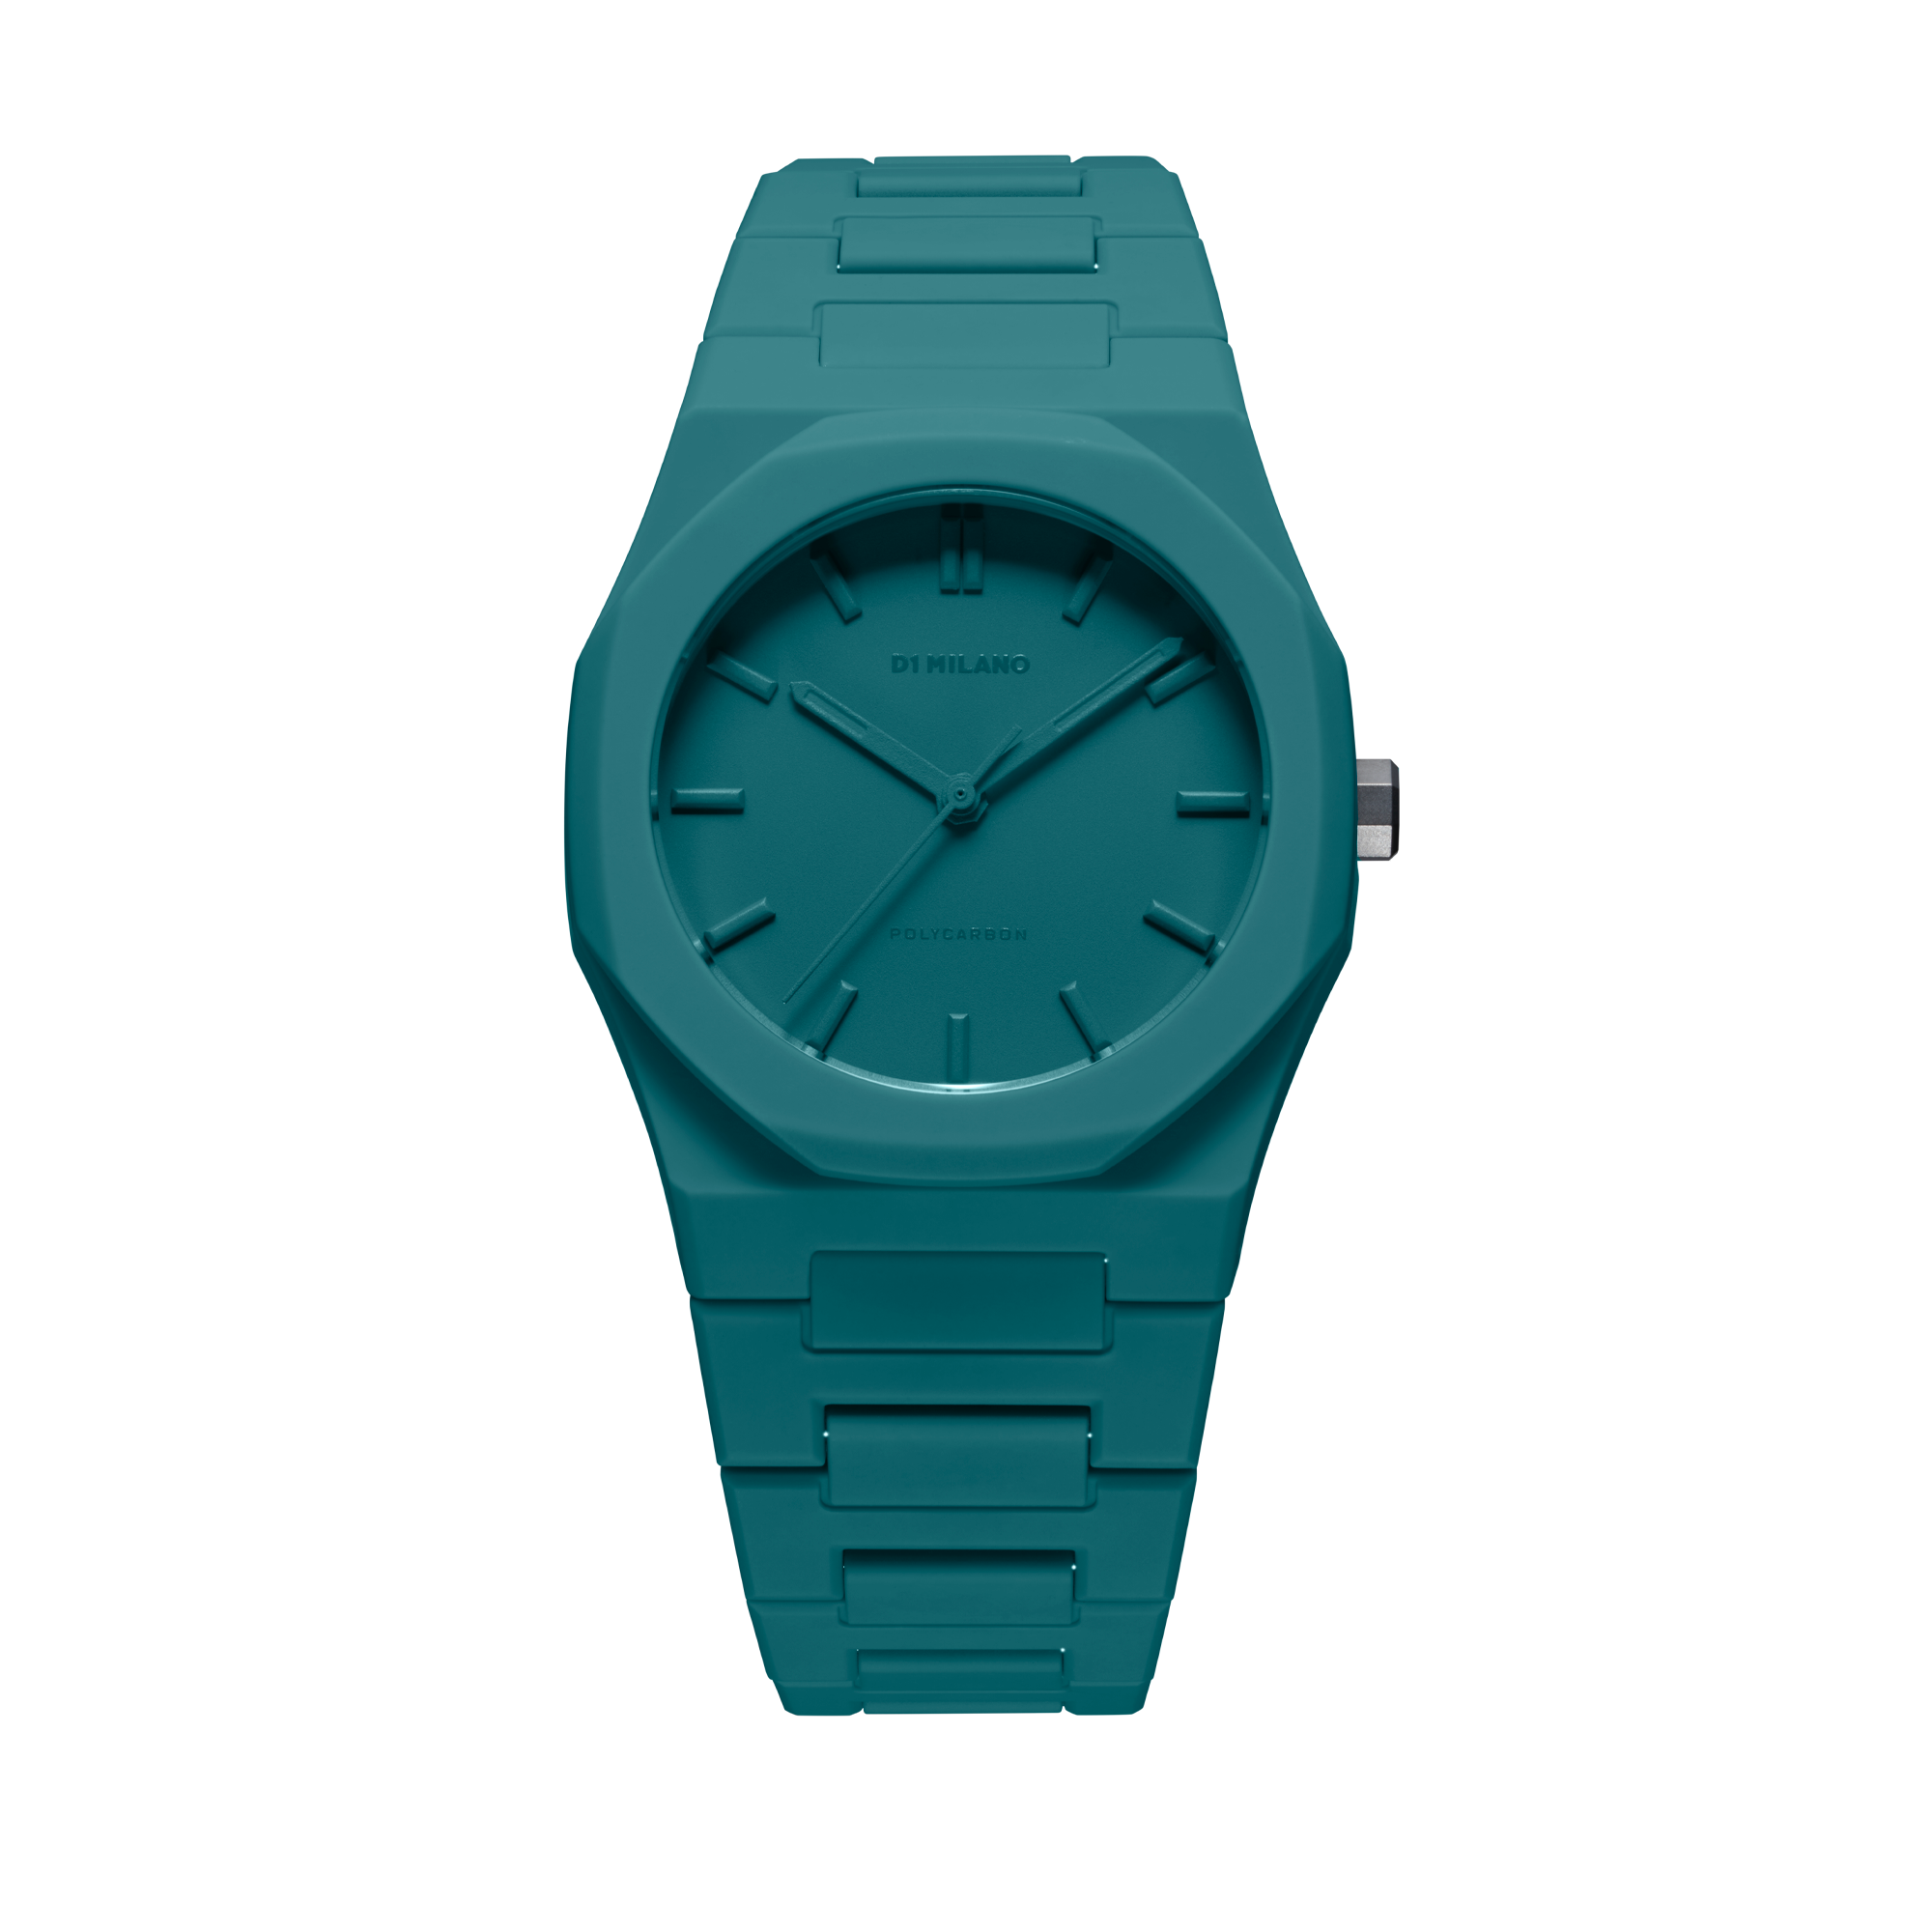 Polycarbon 37 mm - Teal | D1 Milano